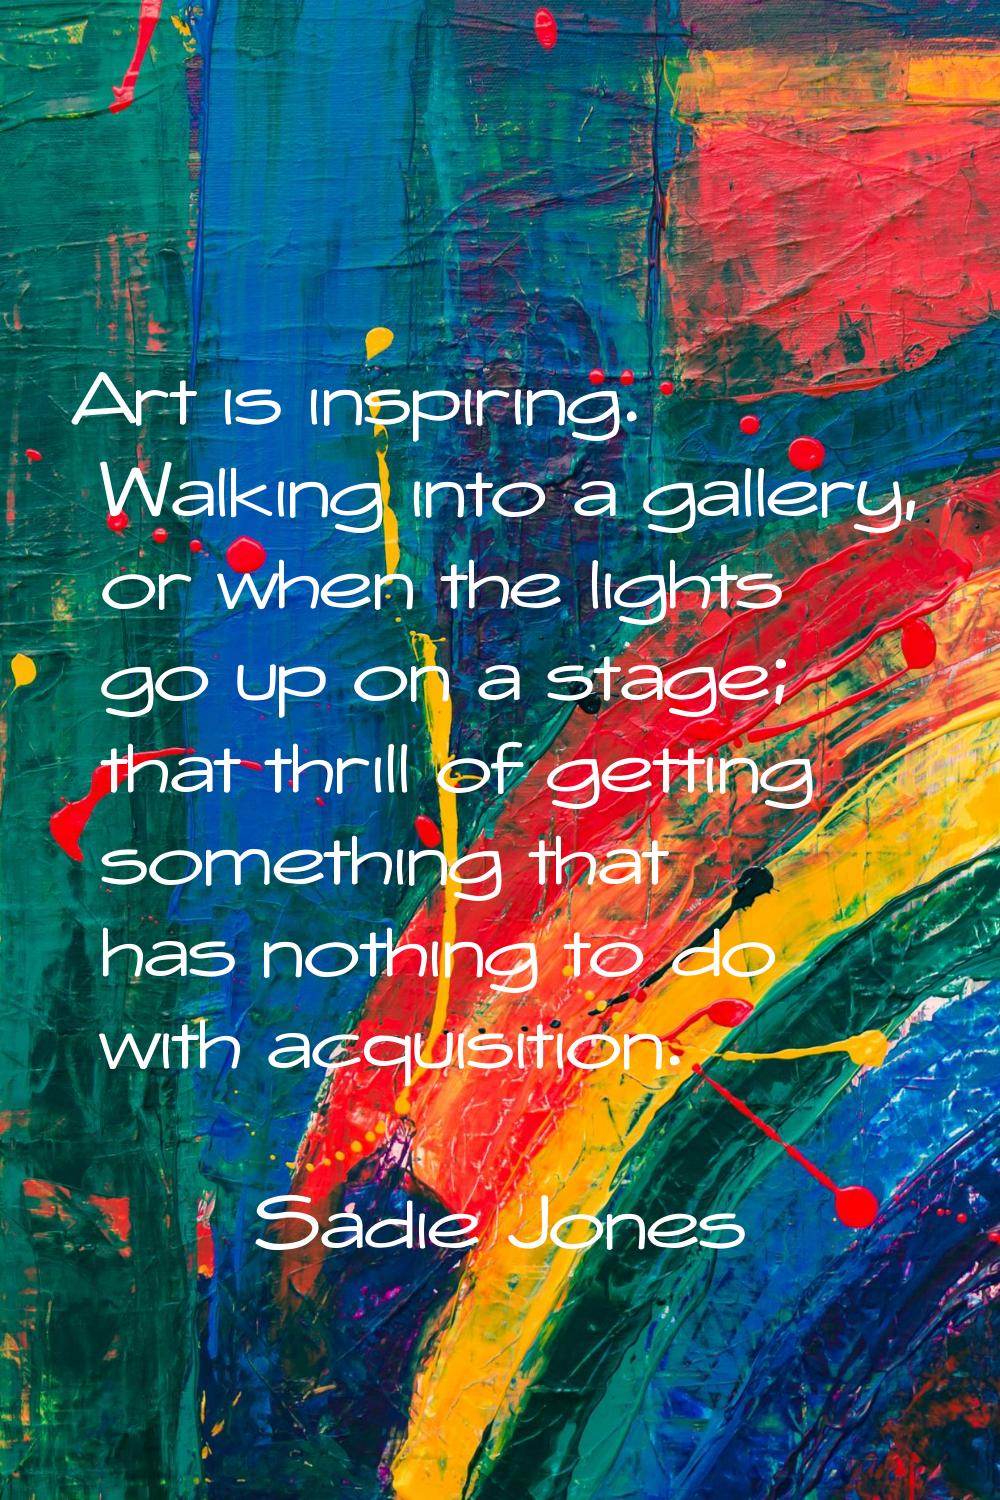 Art is inspiring. Walking into a gallery, or when the lights go up on a stage; that thrill of getti